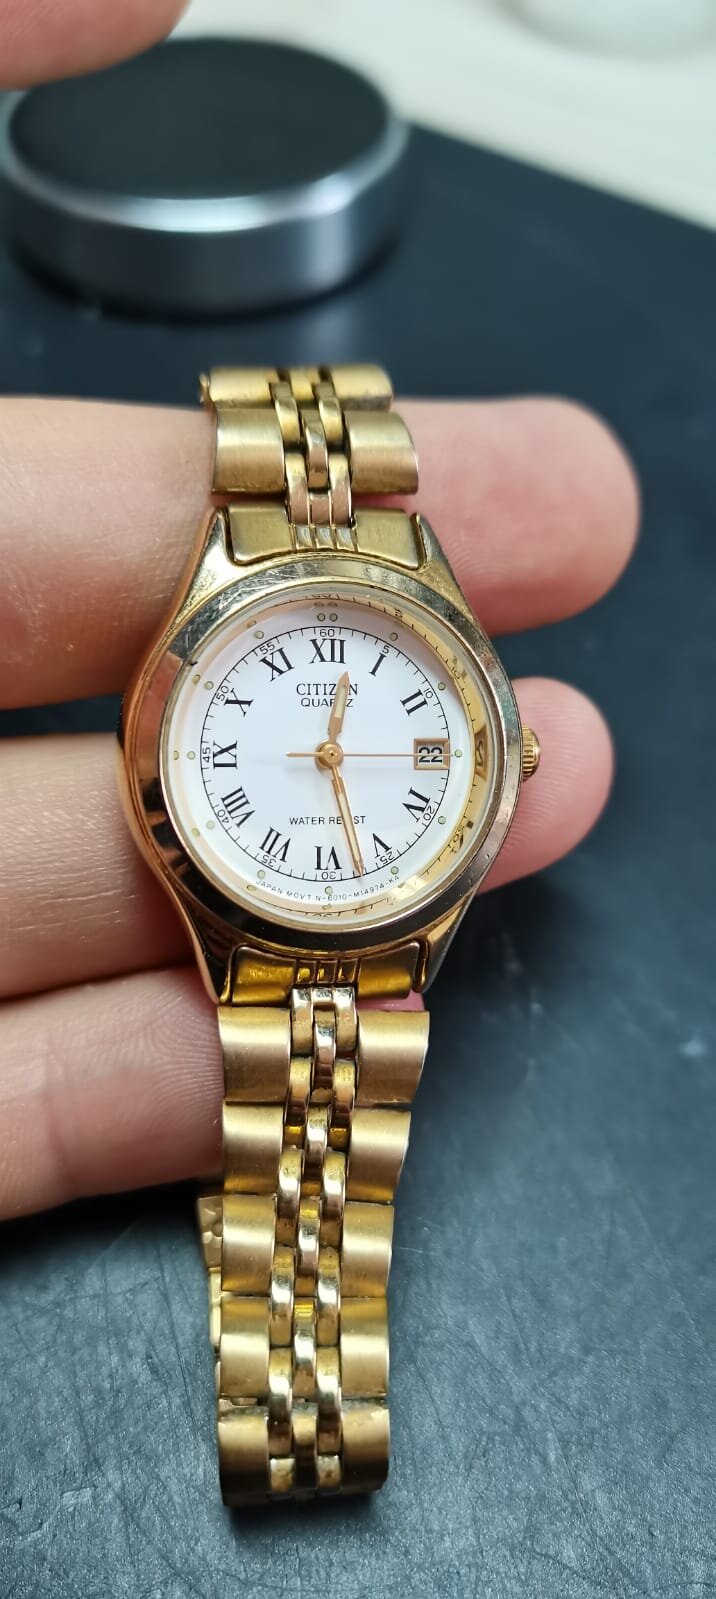 Citizen watch 6010 - 079442M 850436 repair in for service and clean from  West London. | Watches Fixed | Watch Repairs | Latest Watch News | Watch Hub